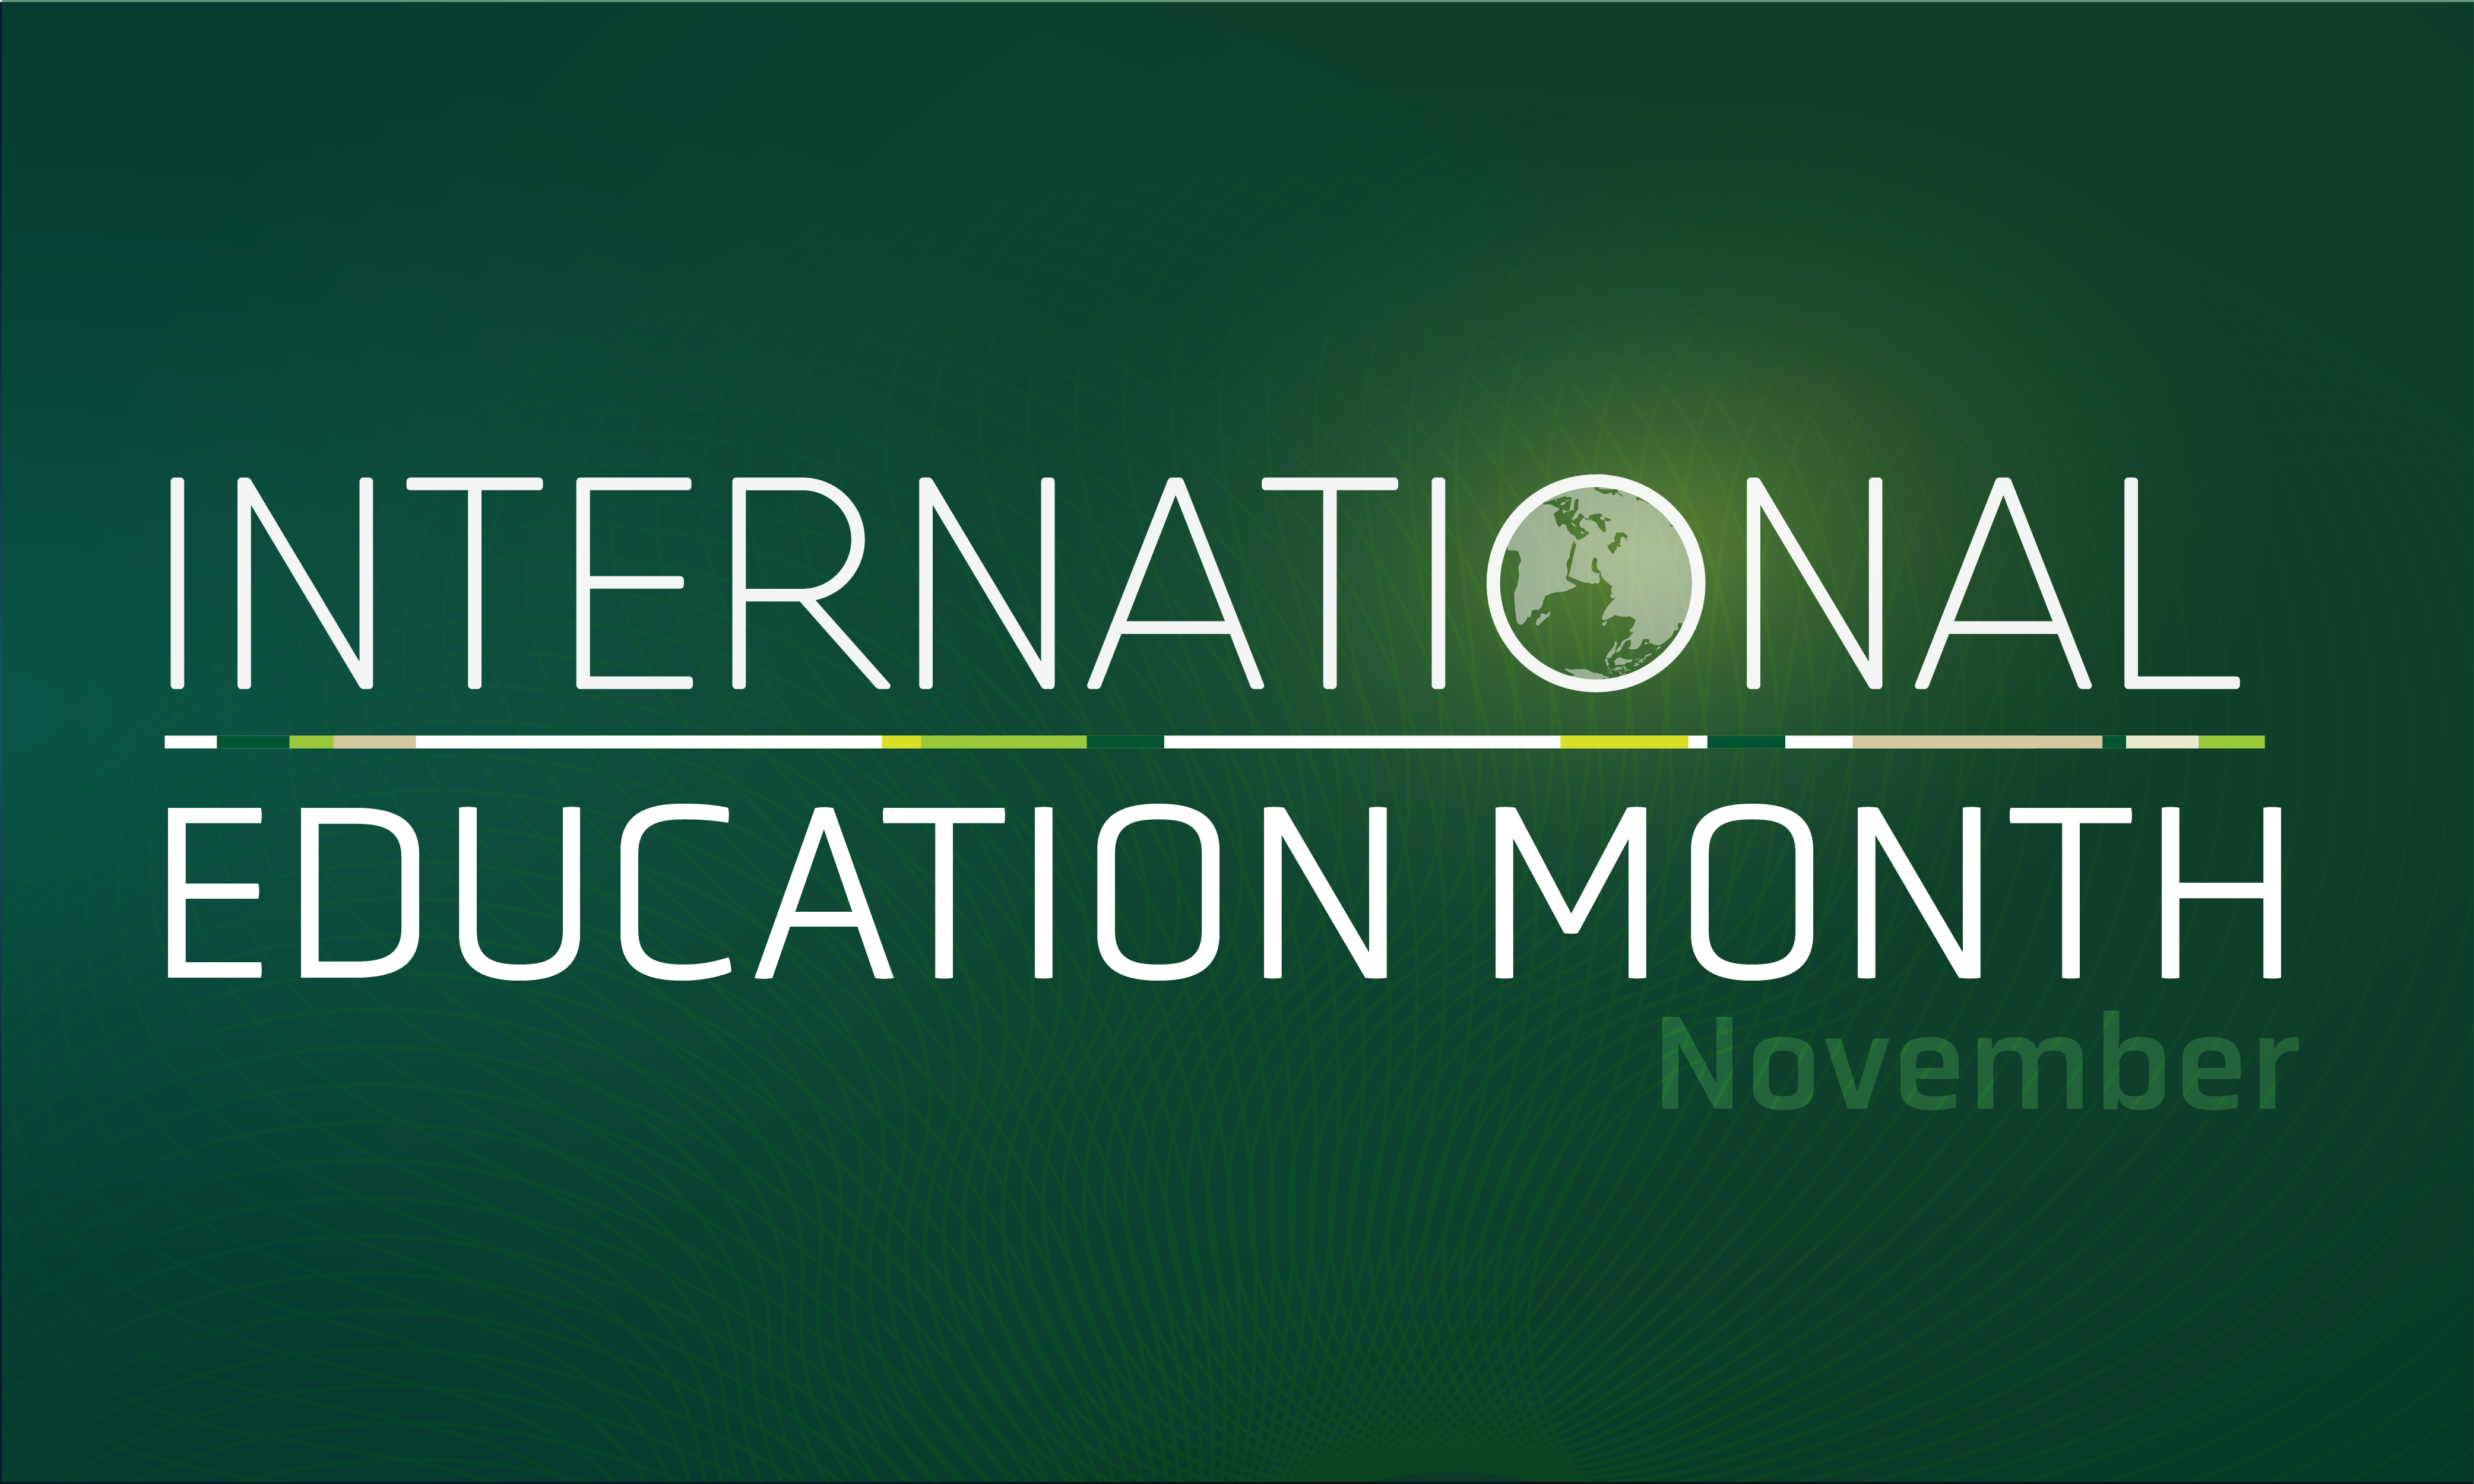 words "international education month, november" set onto a green background with a globe